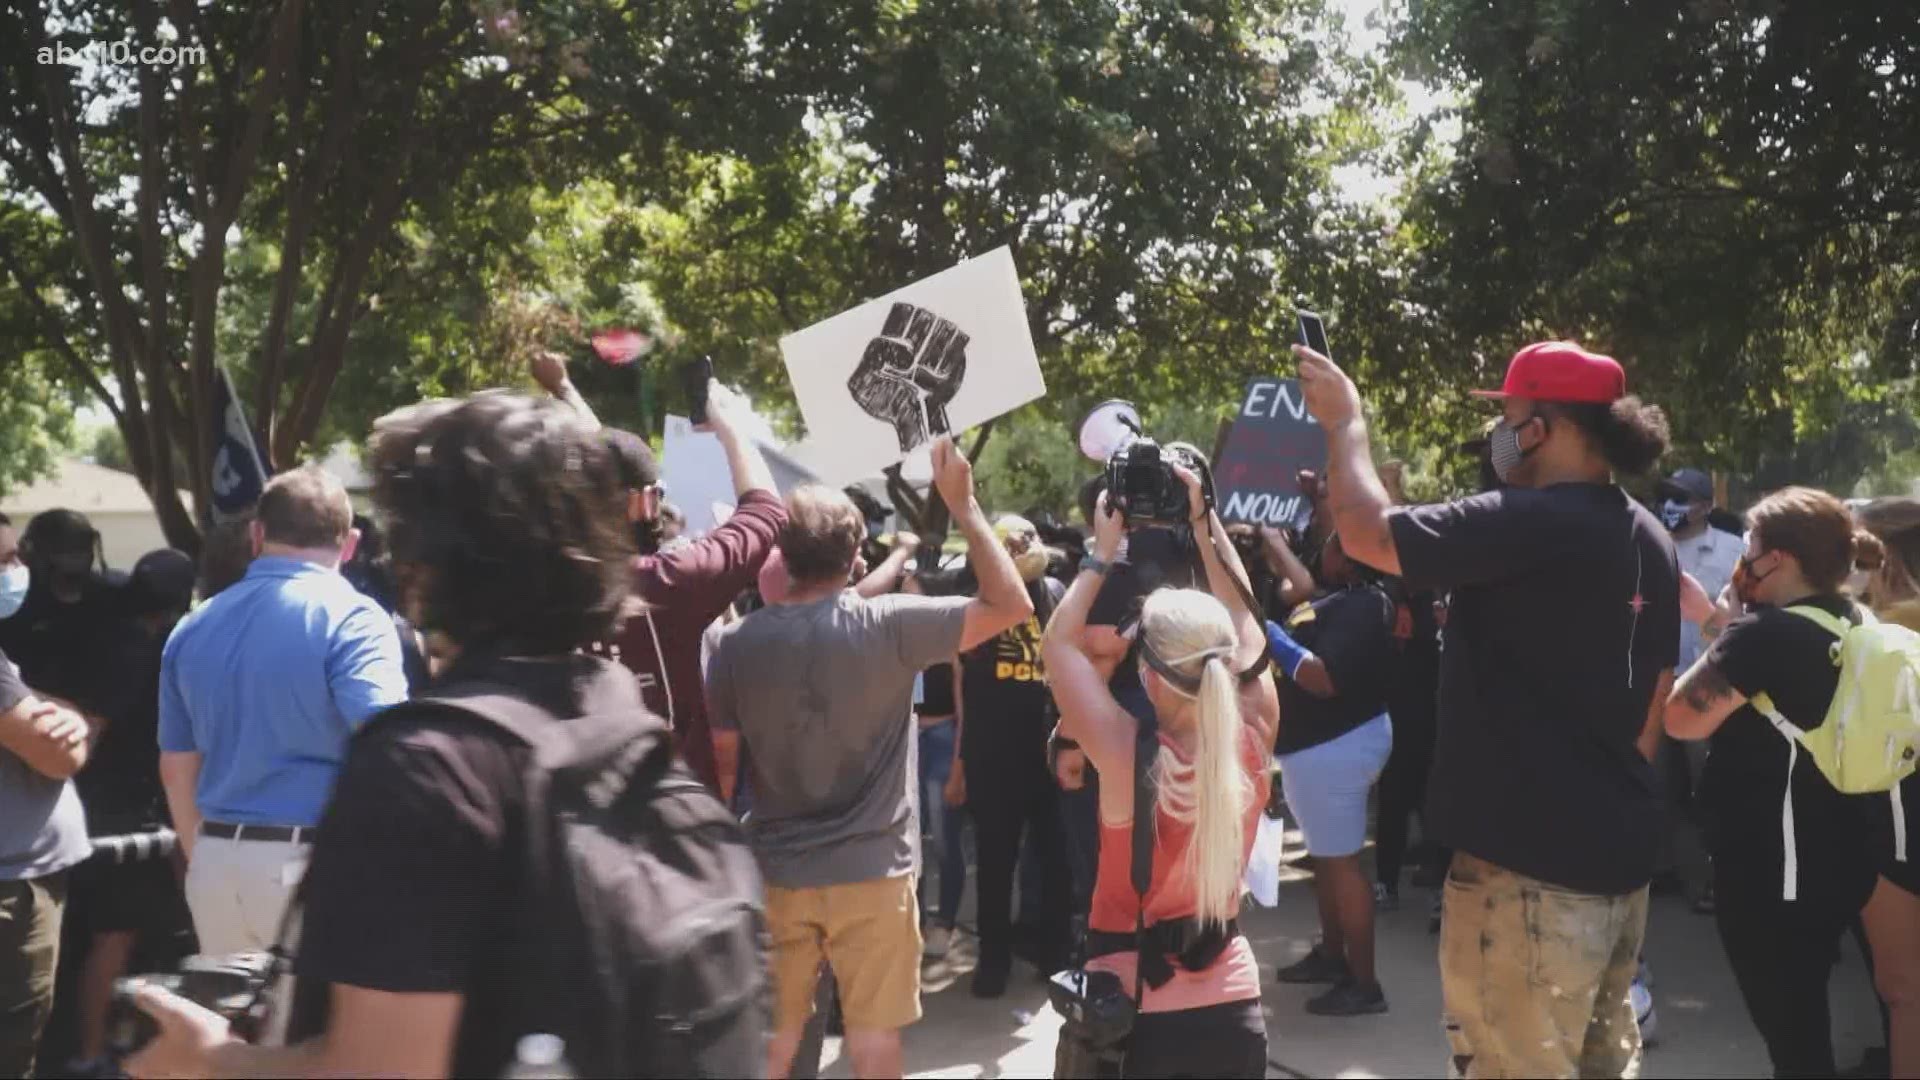 A Black Lives Matter protest in Lodi calling to defund police was met by All Lives Matter counter-protesters.